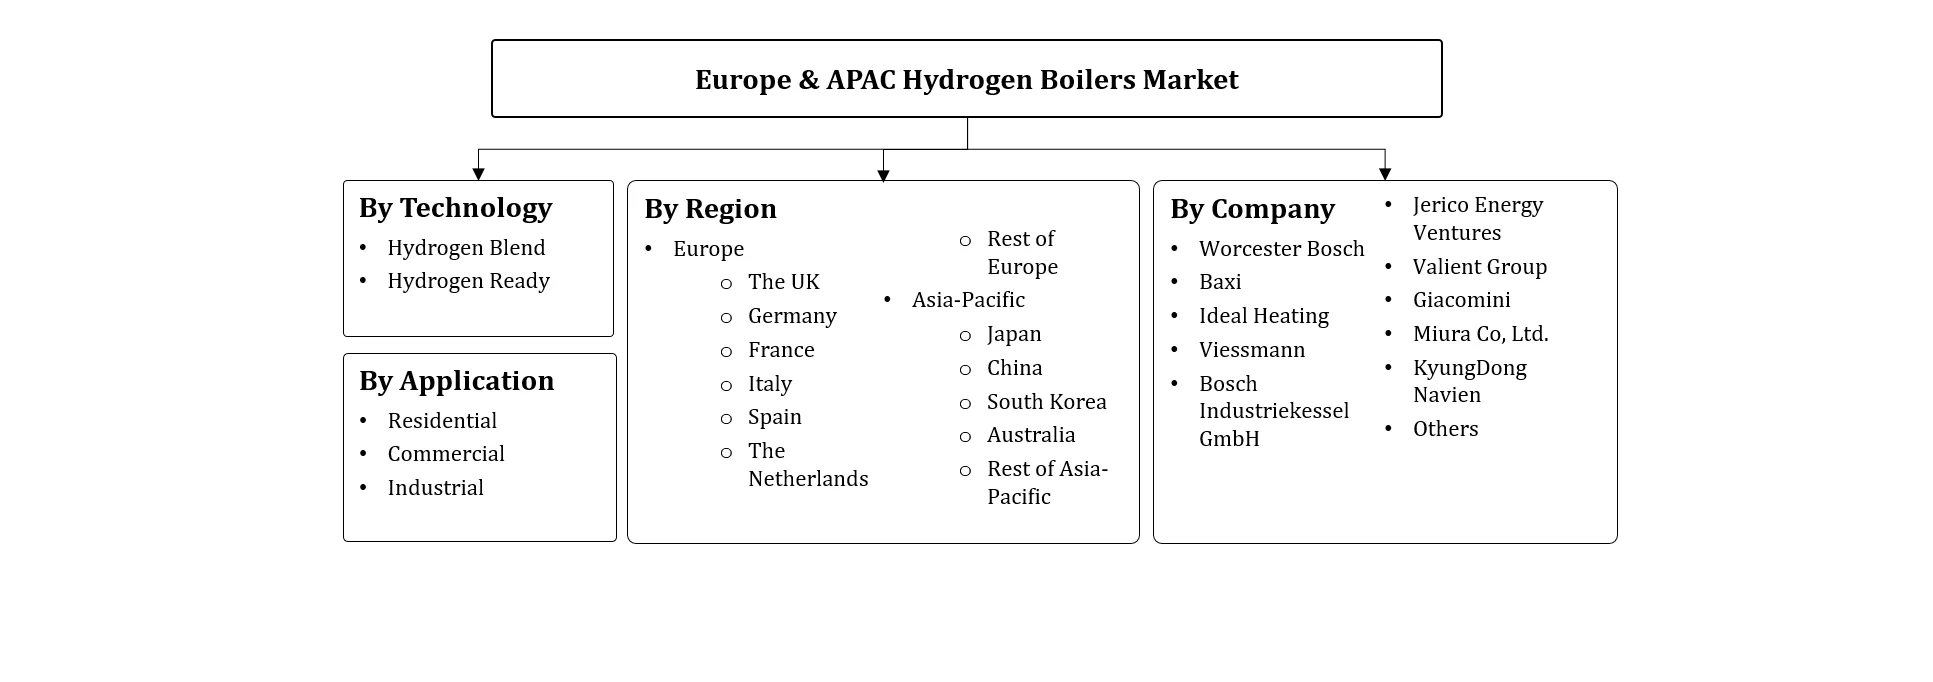 Europe and Asia-Pacific Hydrogen Boilers Market Segmentation